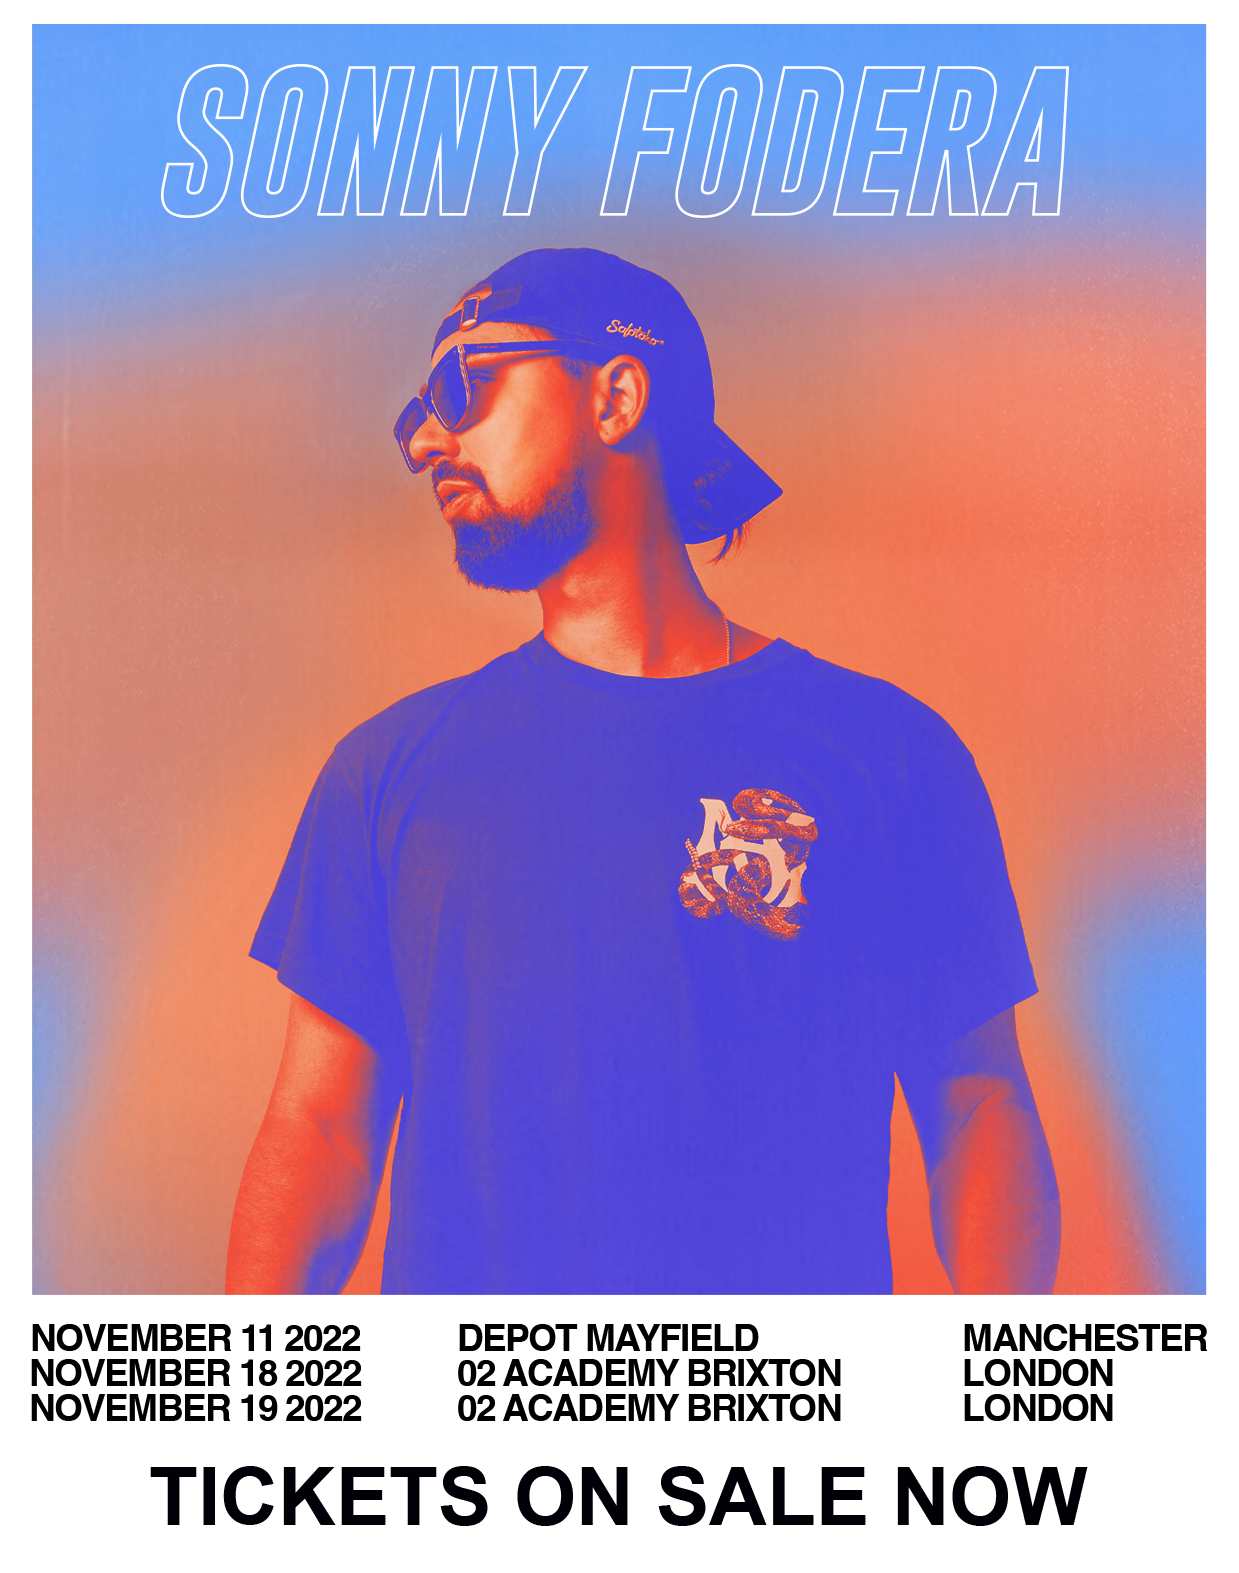 Sonny Fodera Tour Tickets on sale now.